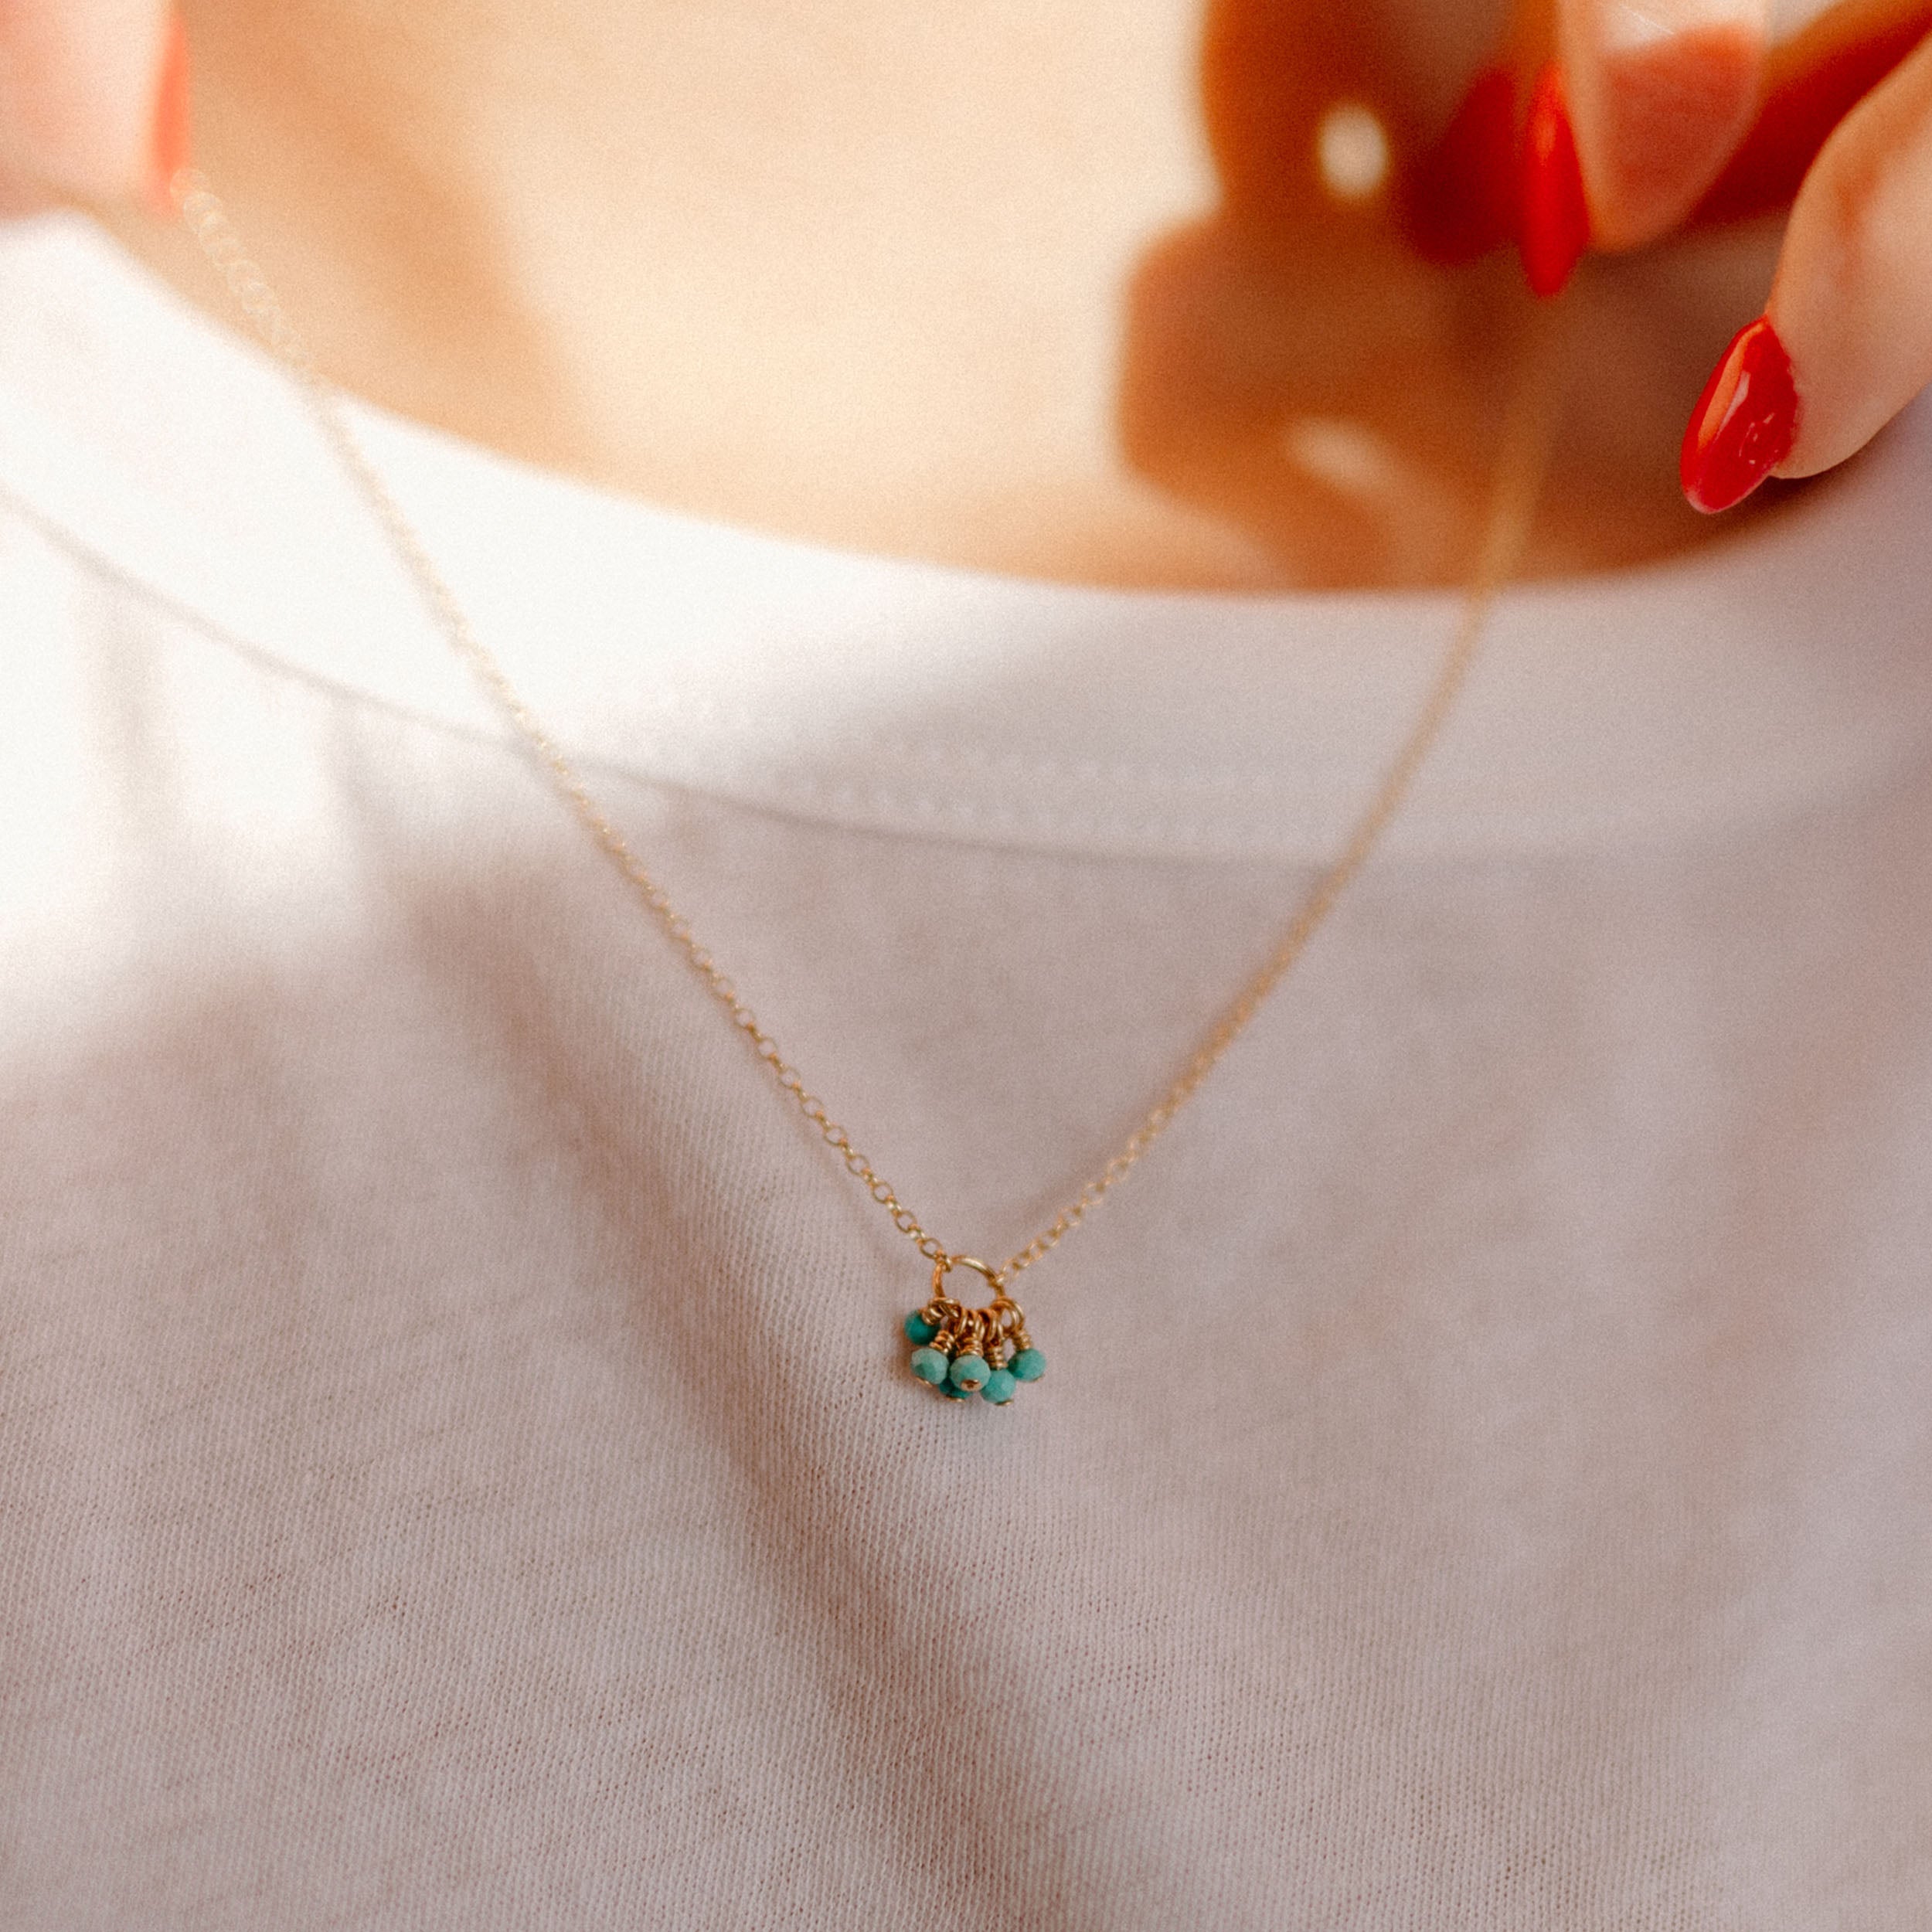 Tiny Turquoise Gemstone Cluster Necklace 14k Gold Fill - Favor Jewelry